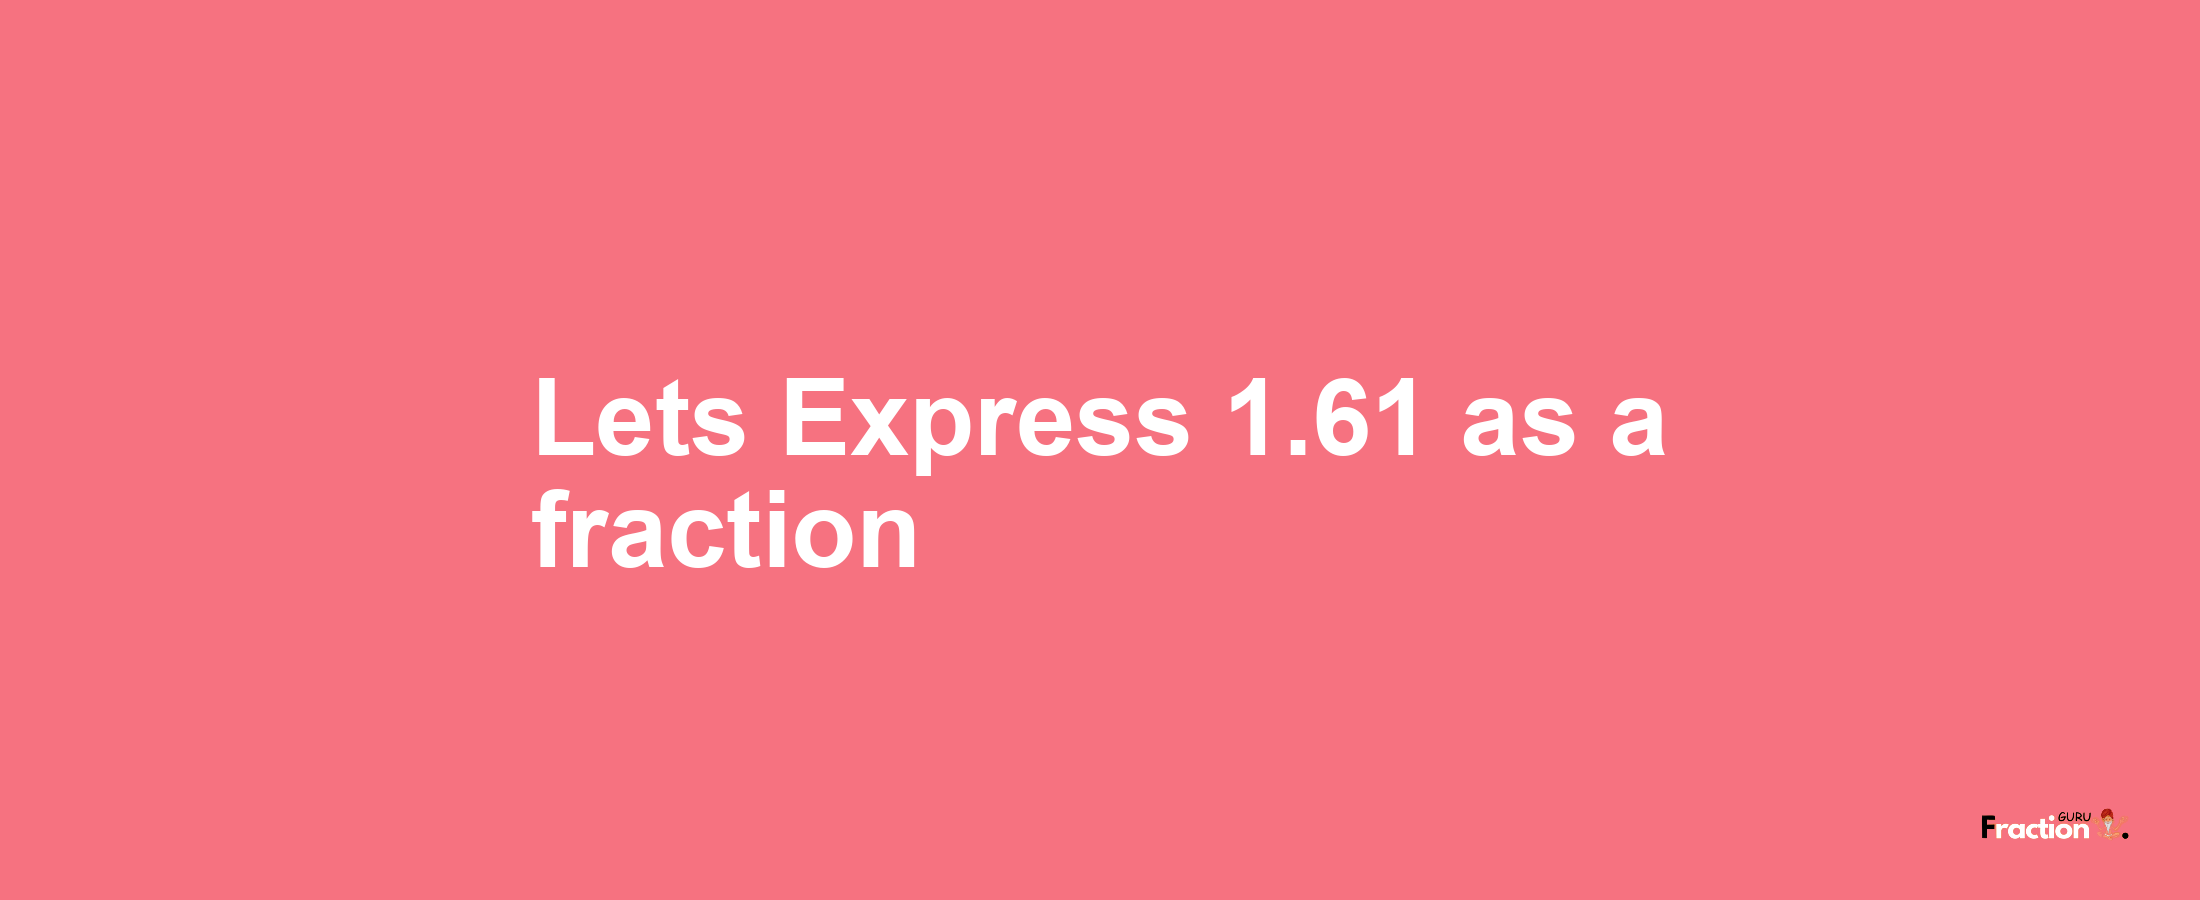 Lets Express 1.61 as afraction